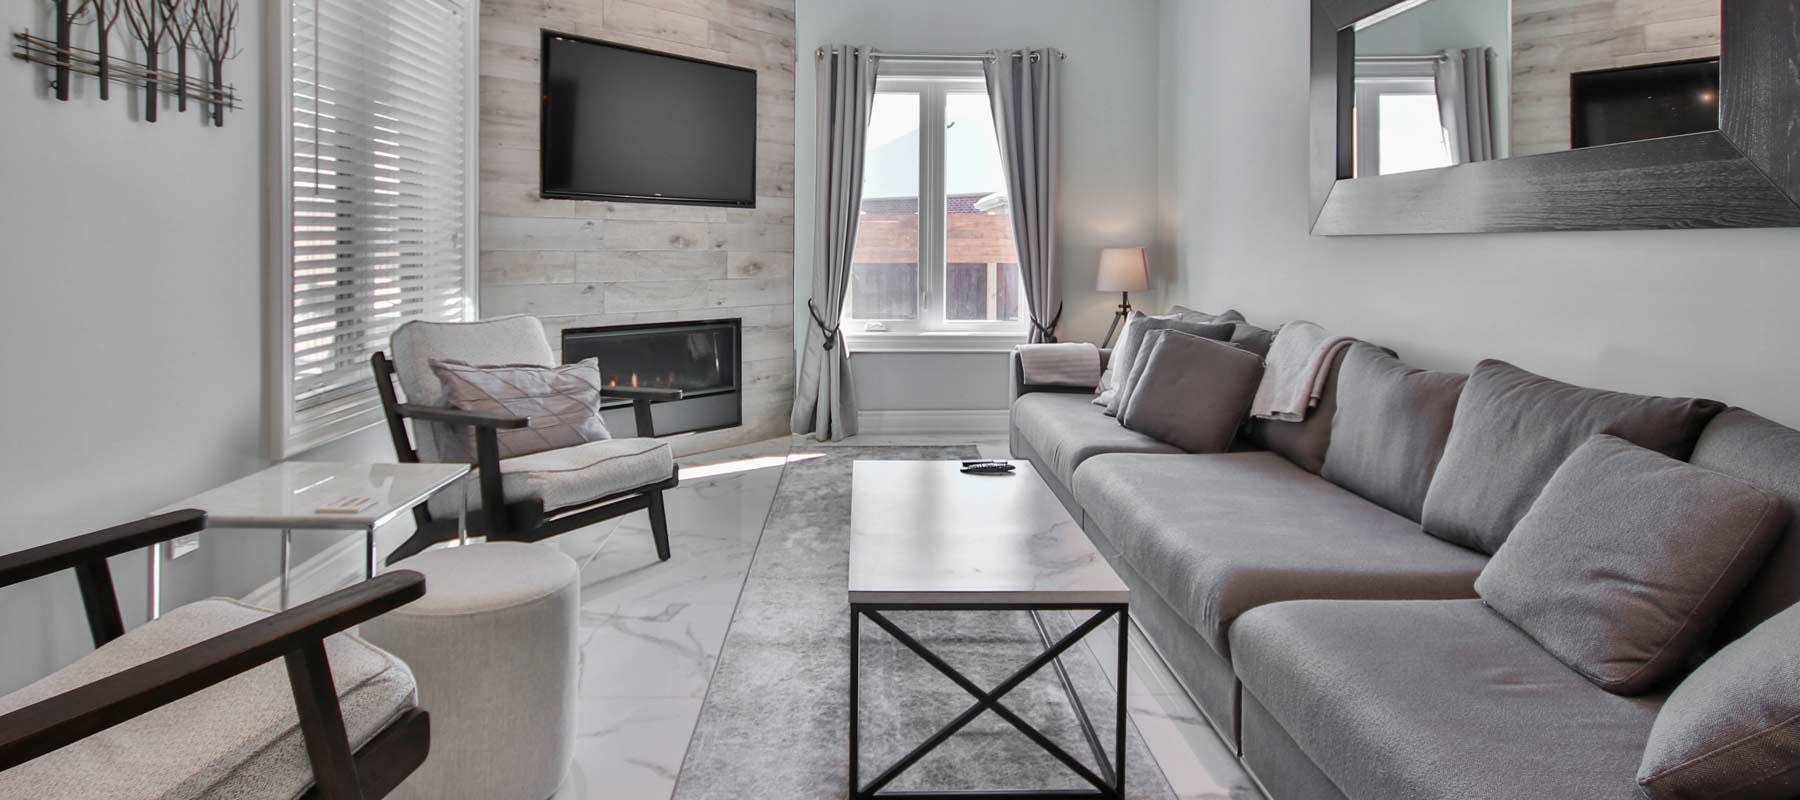 gray living room with a fireplace and tv